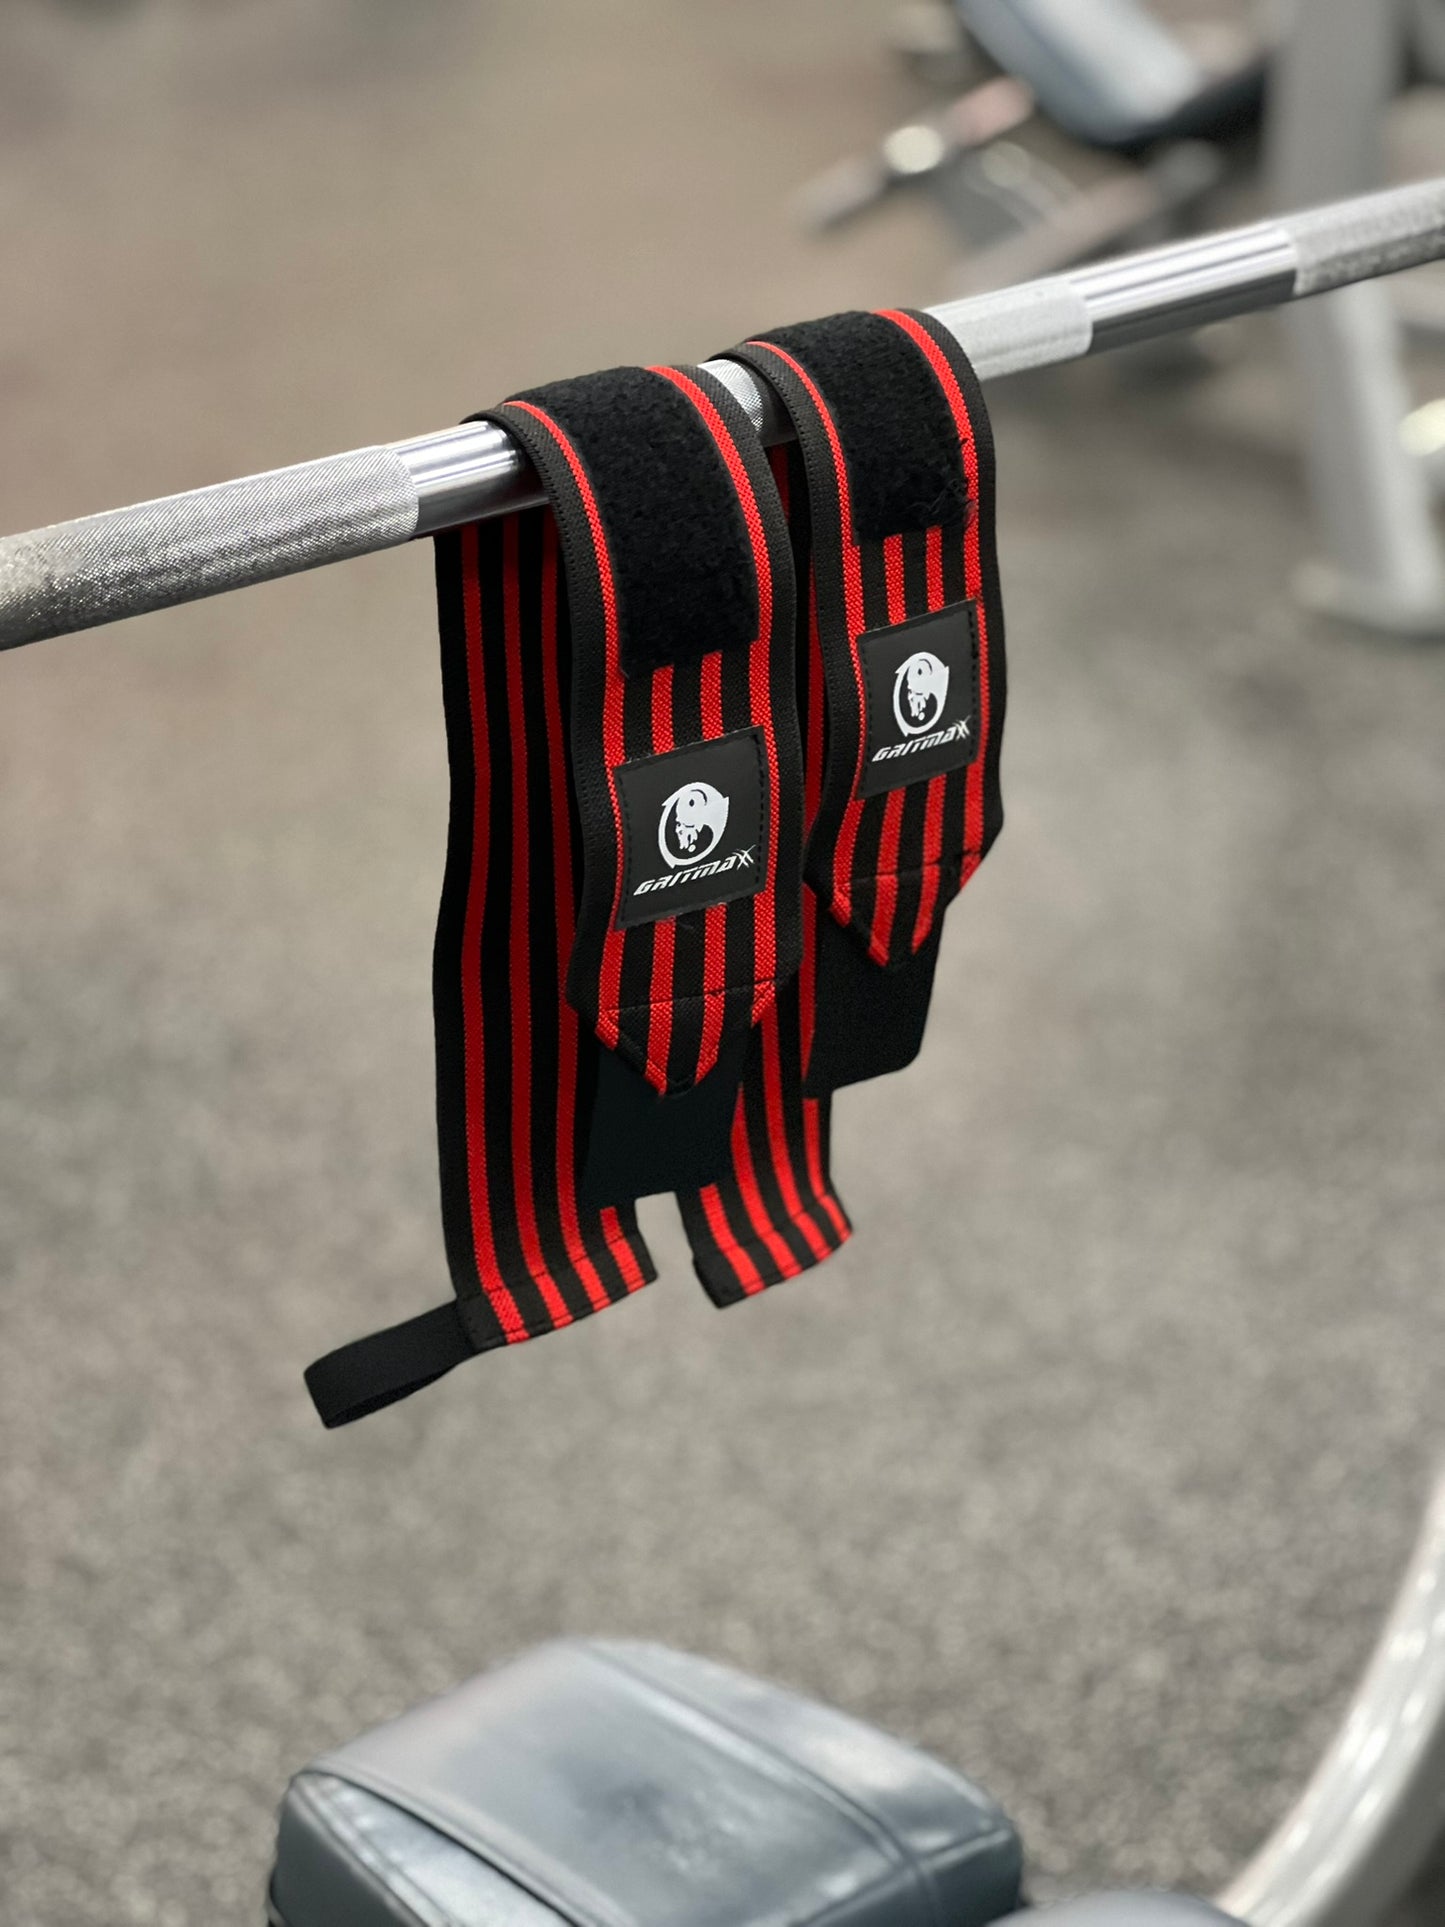 GRITMAXX Wrist Wraps - 21" Weightlifting Wrist Support-RED - GRIT GEAR